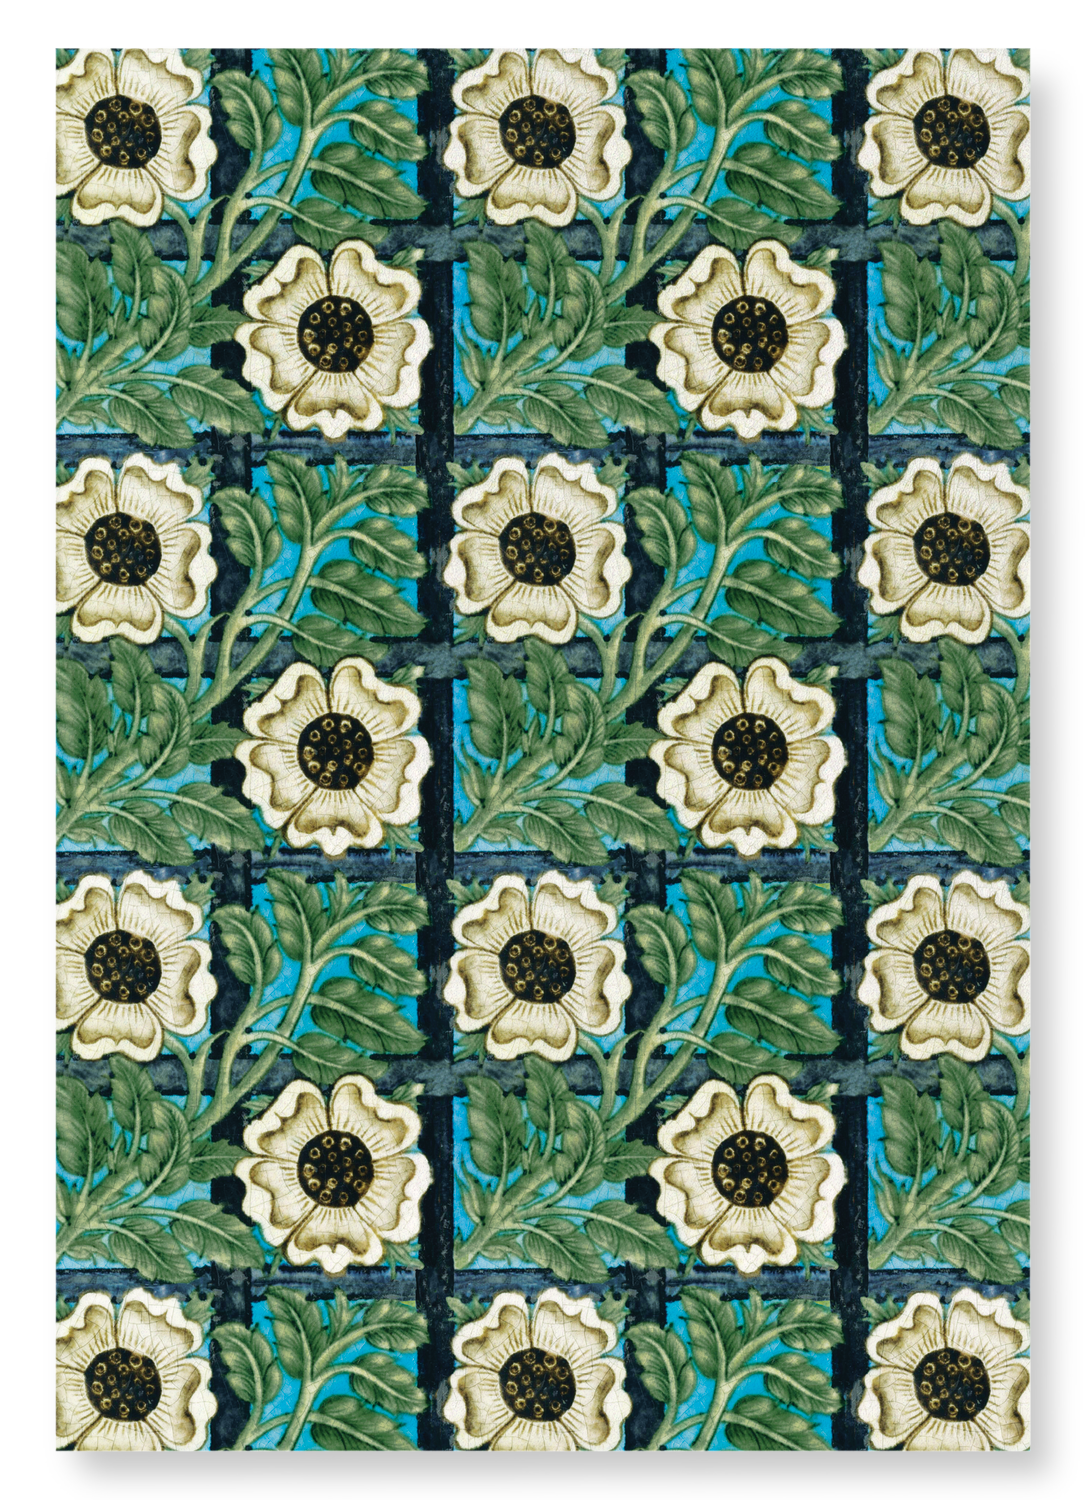 ROSE AND TRELLIS TILE (1898)